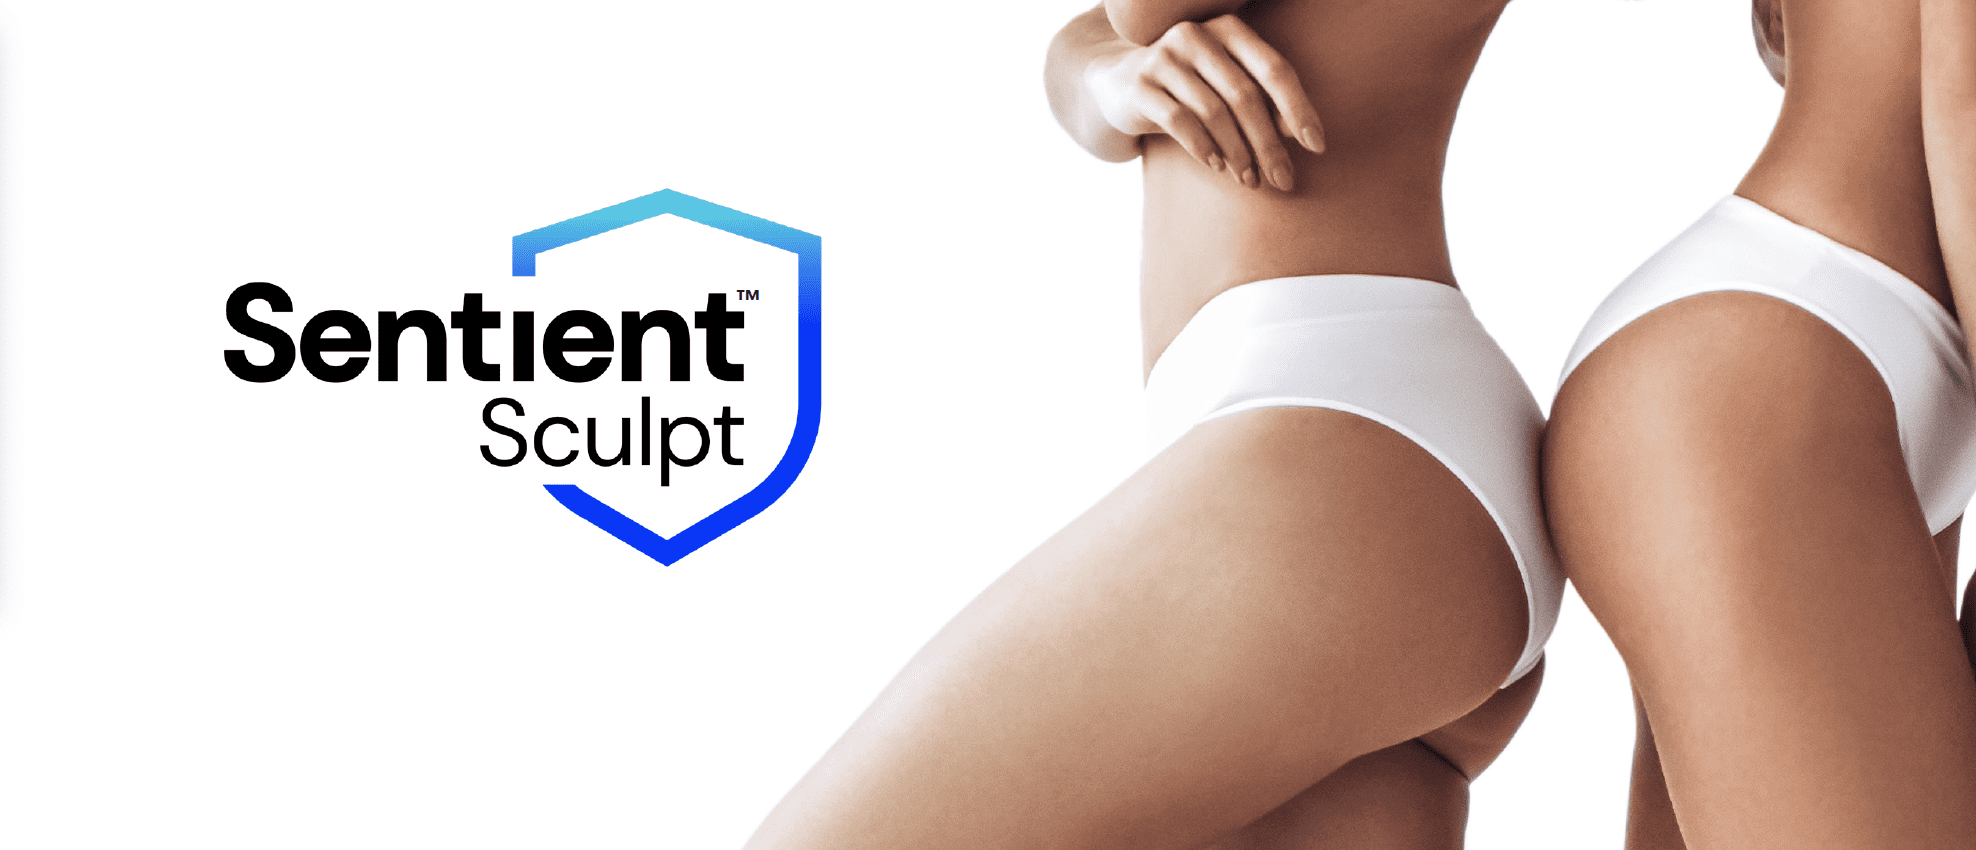 Sculpt by Sentient – Skin Retouch MediSpa  Weight Loss, Body Contouring,  Face & Skin Treatments